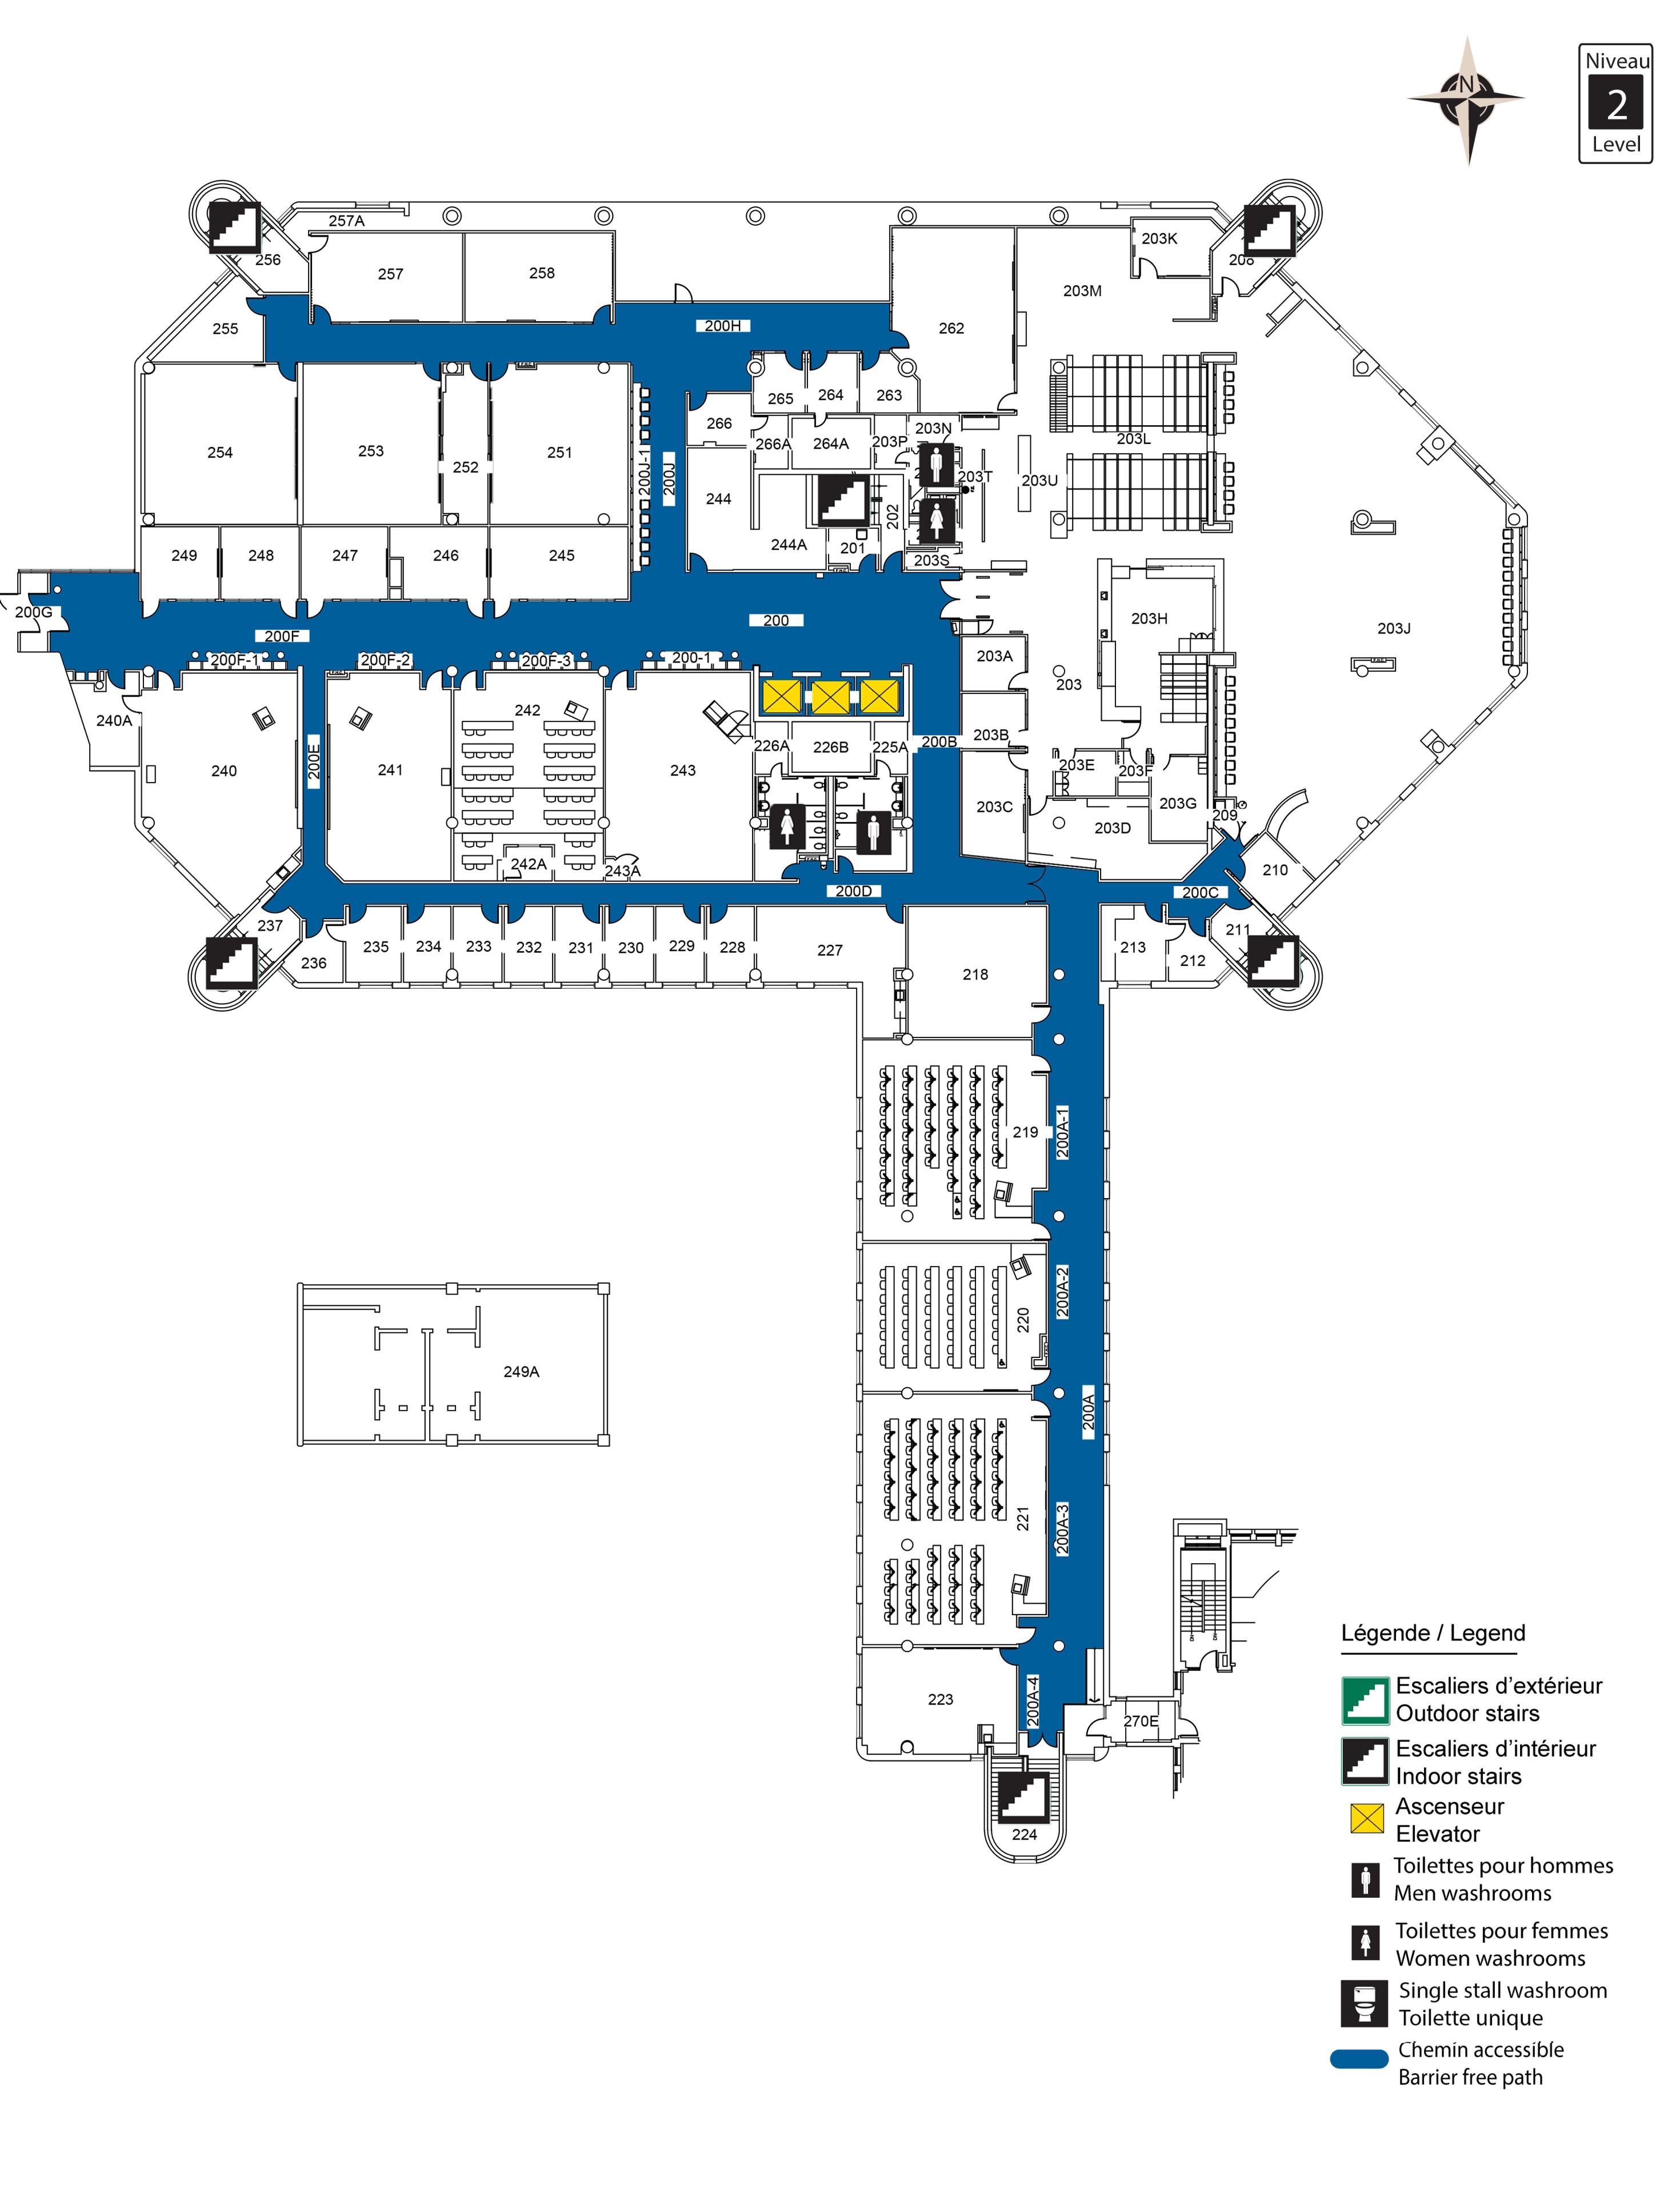 Accessible map of LMX level 2